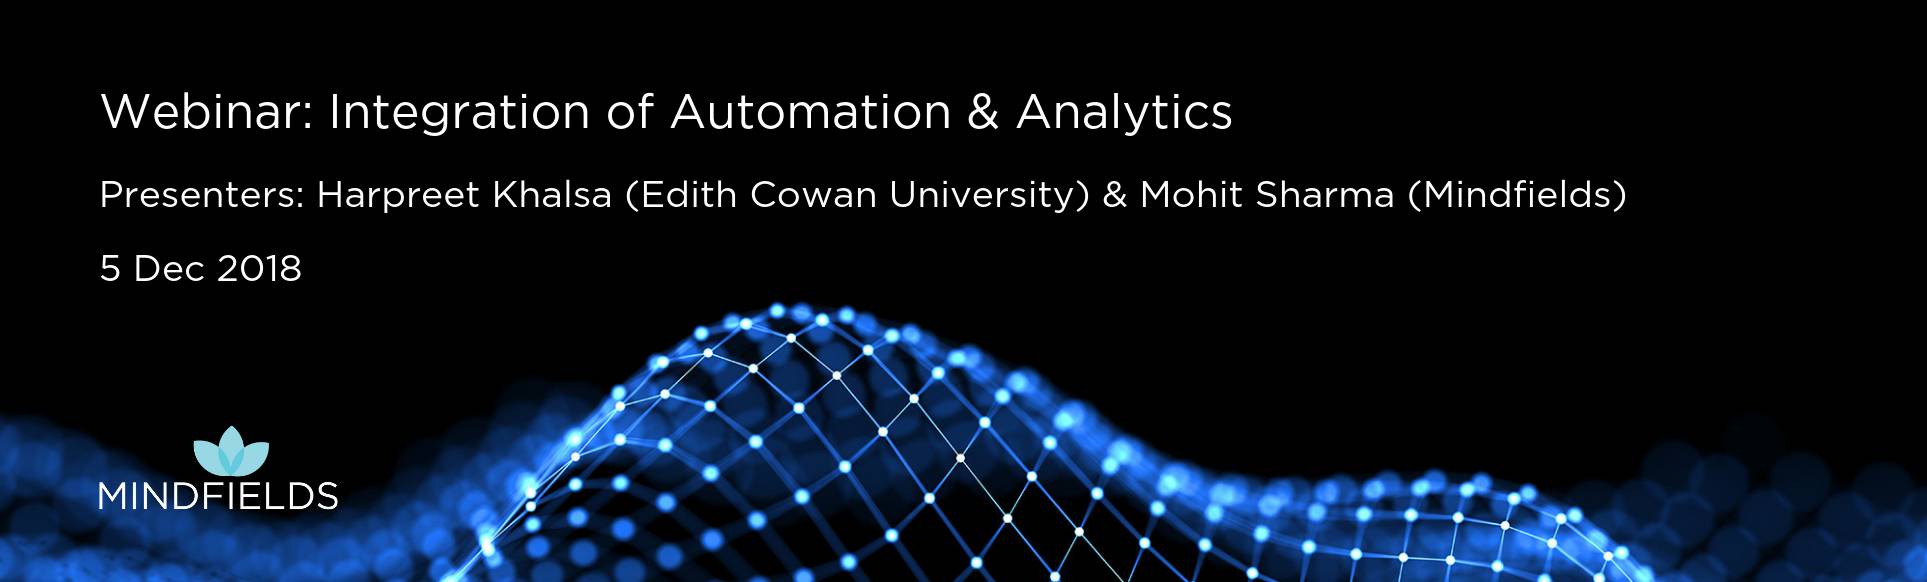 integration-of-automation-and-analytics